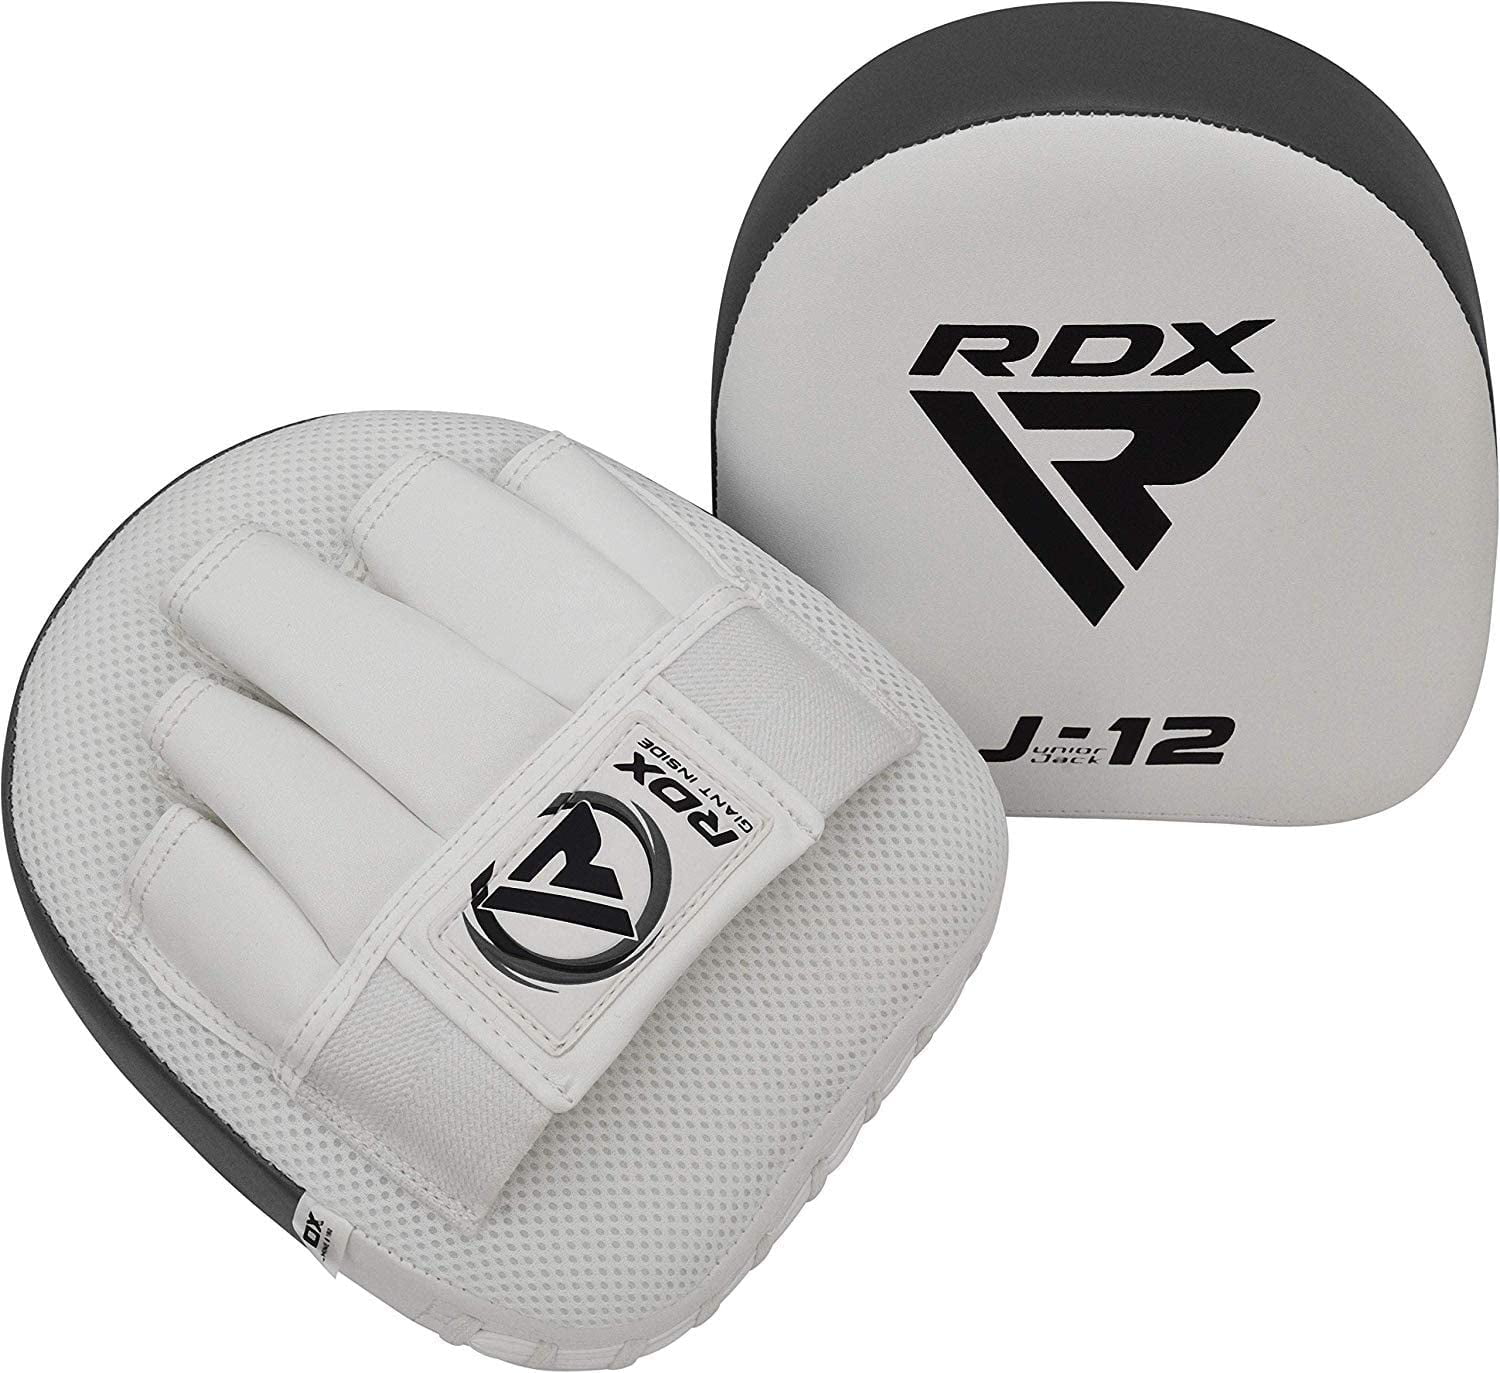 RDX Leather Focus Pads Hook and Jab Boxing Muay Thai Curved Mitts Punching MMA C